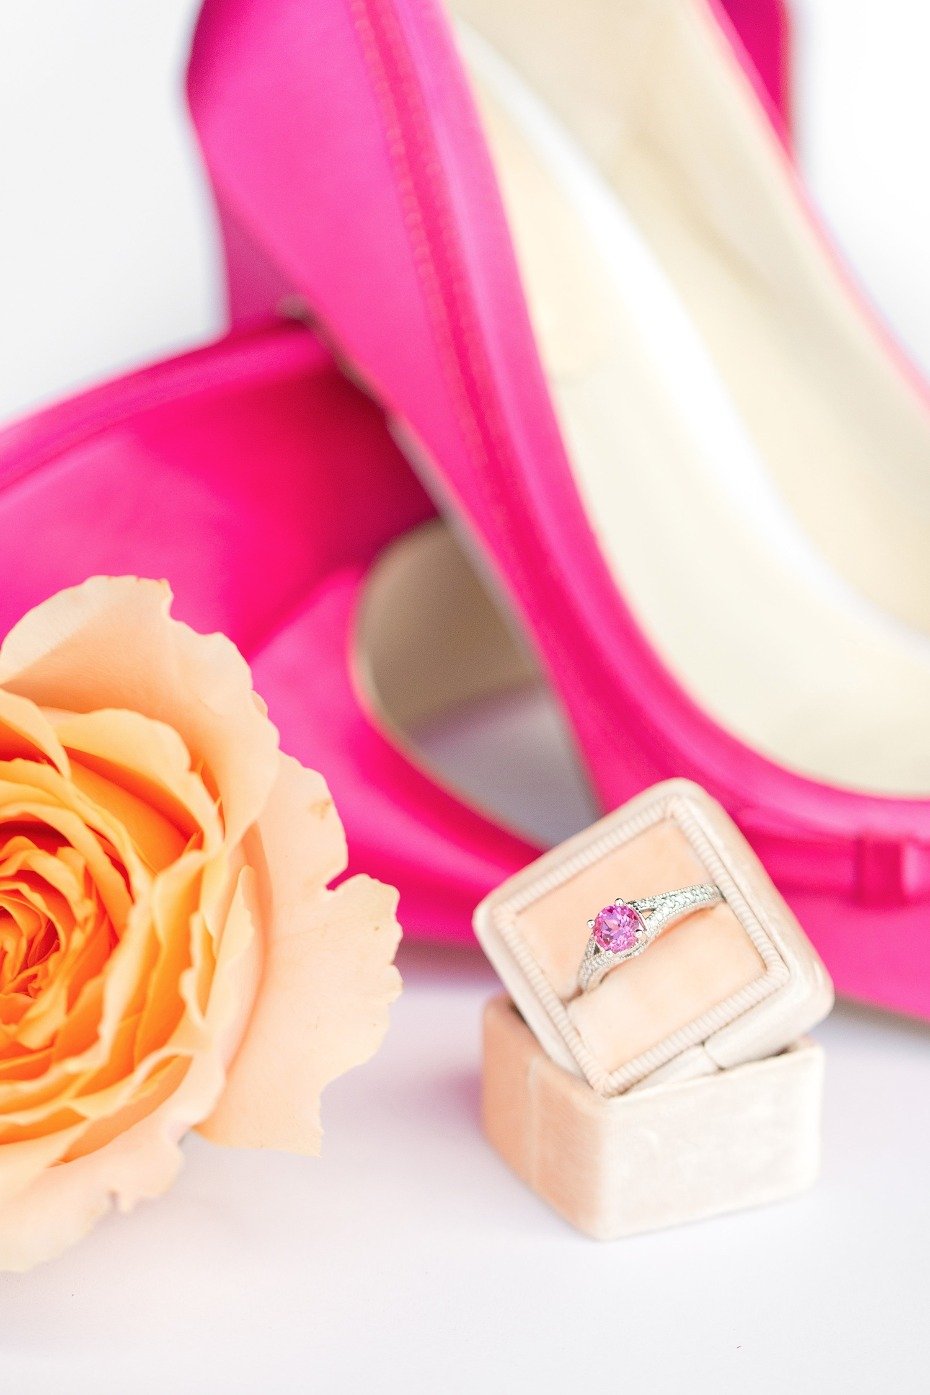 Hot pink shoes and engagement ring